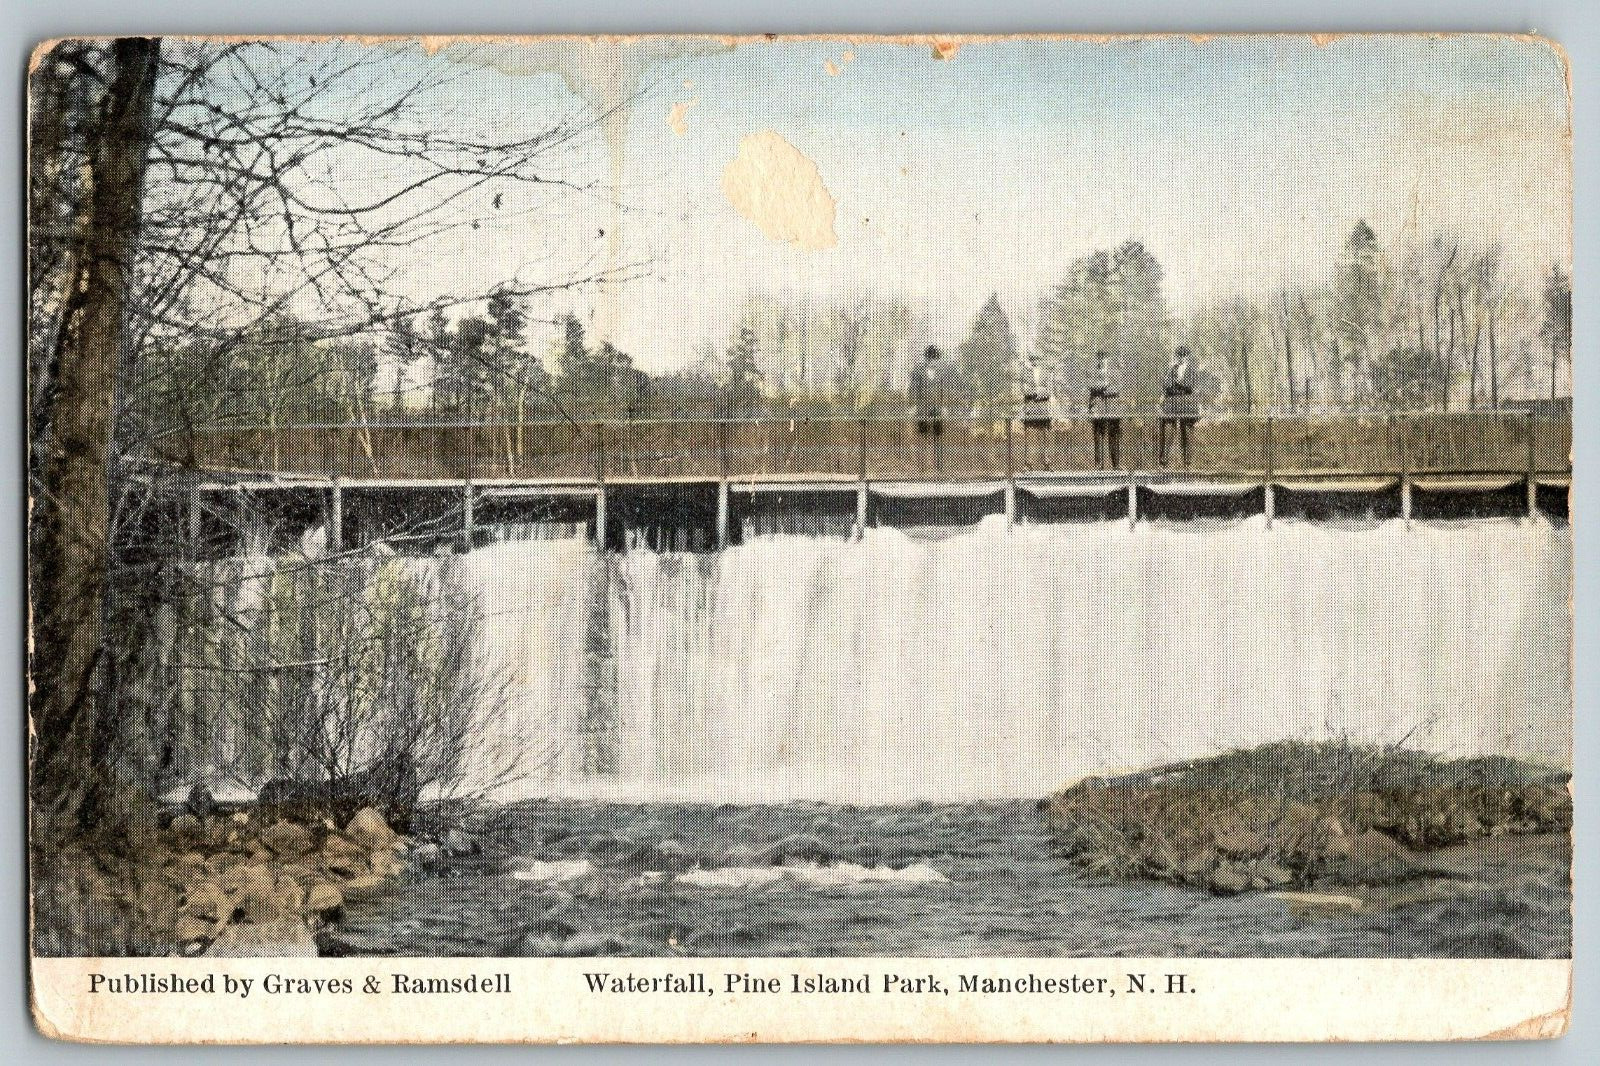 Manchester, New Hampshire - Waterfall, Pine Island Park - Vintage Postcard